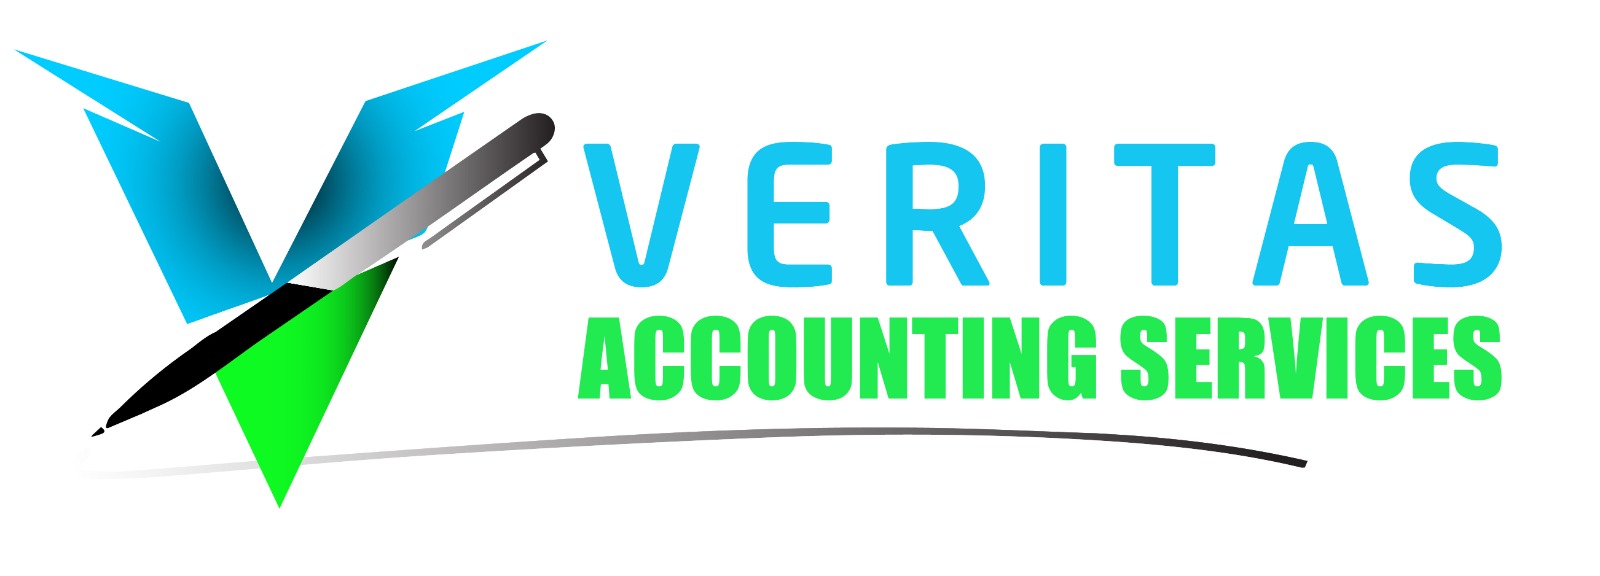 Welcome to Veritas Accounting Services